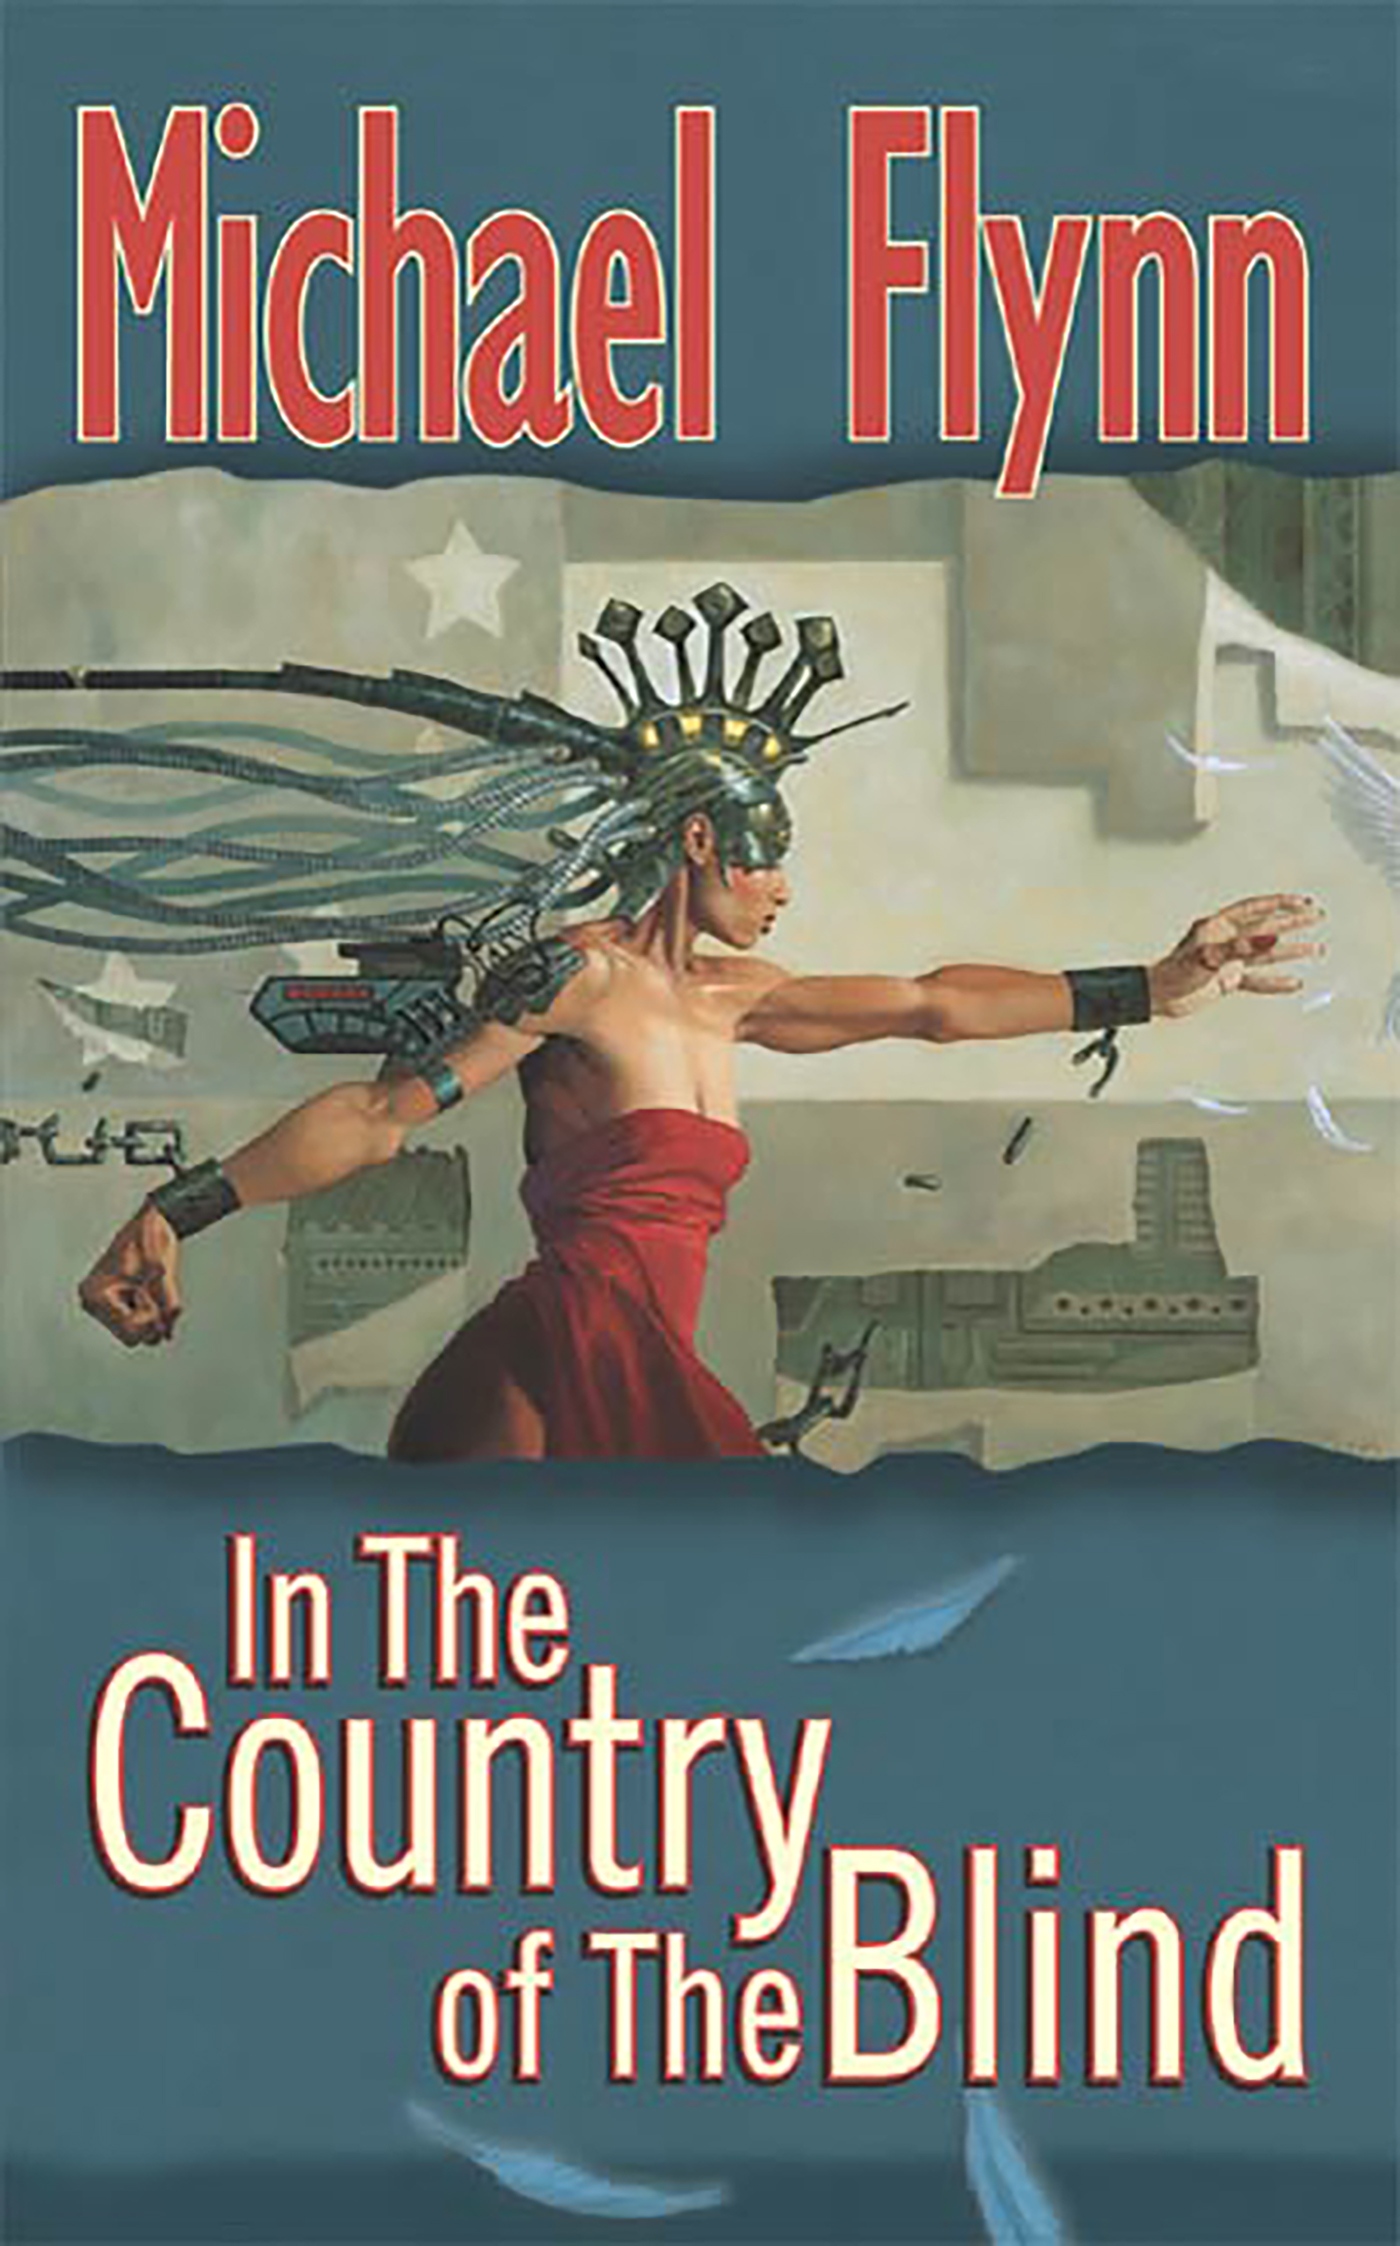 In the Country of the Blind by Michael Flynn